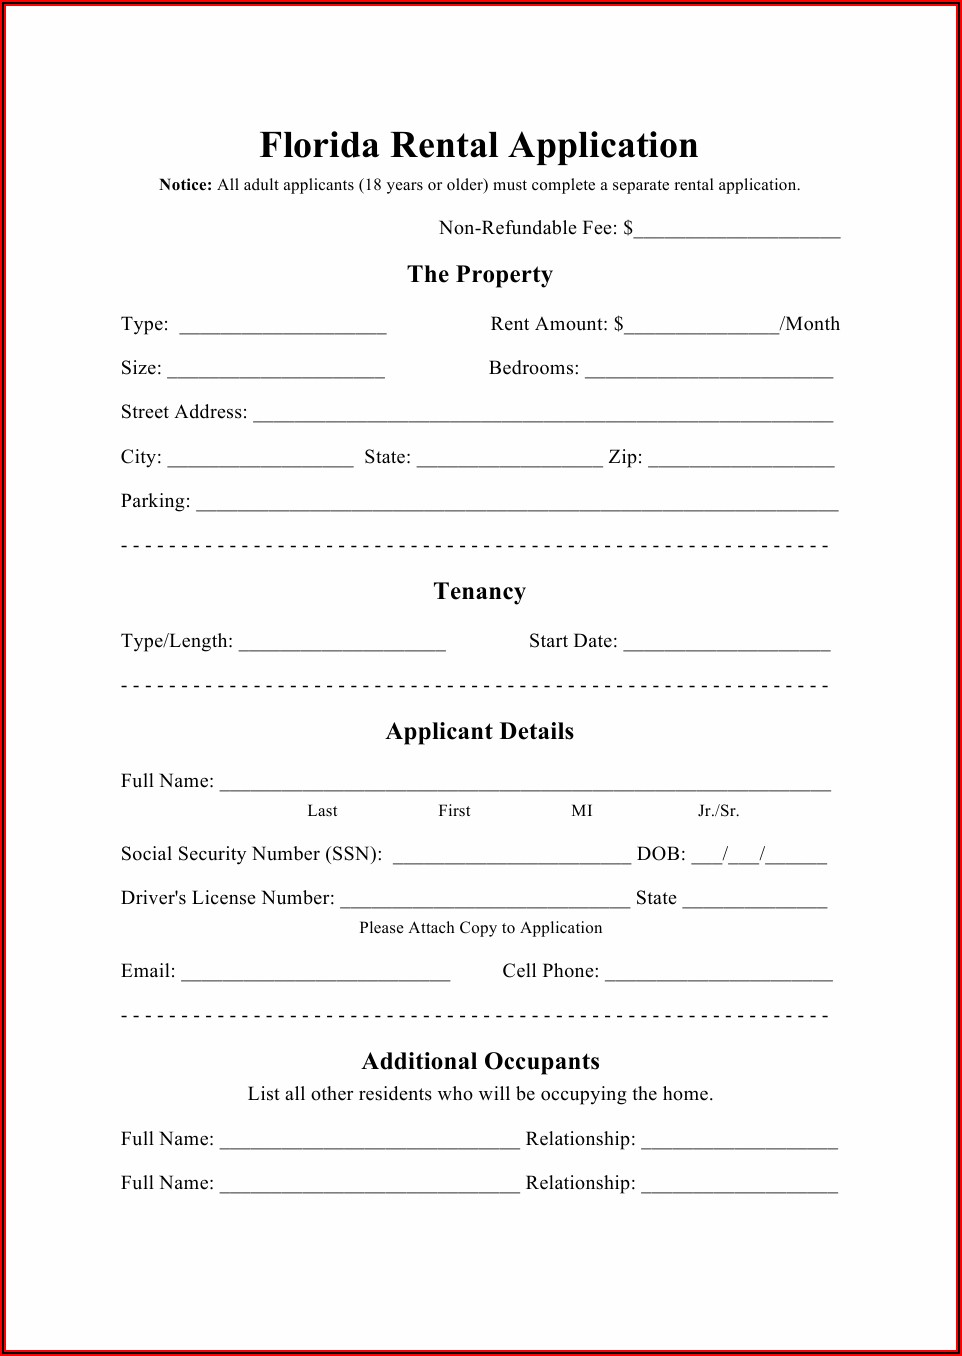 Home Rental Application Forms